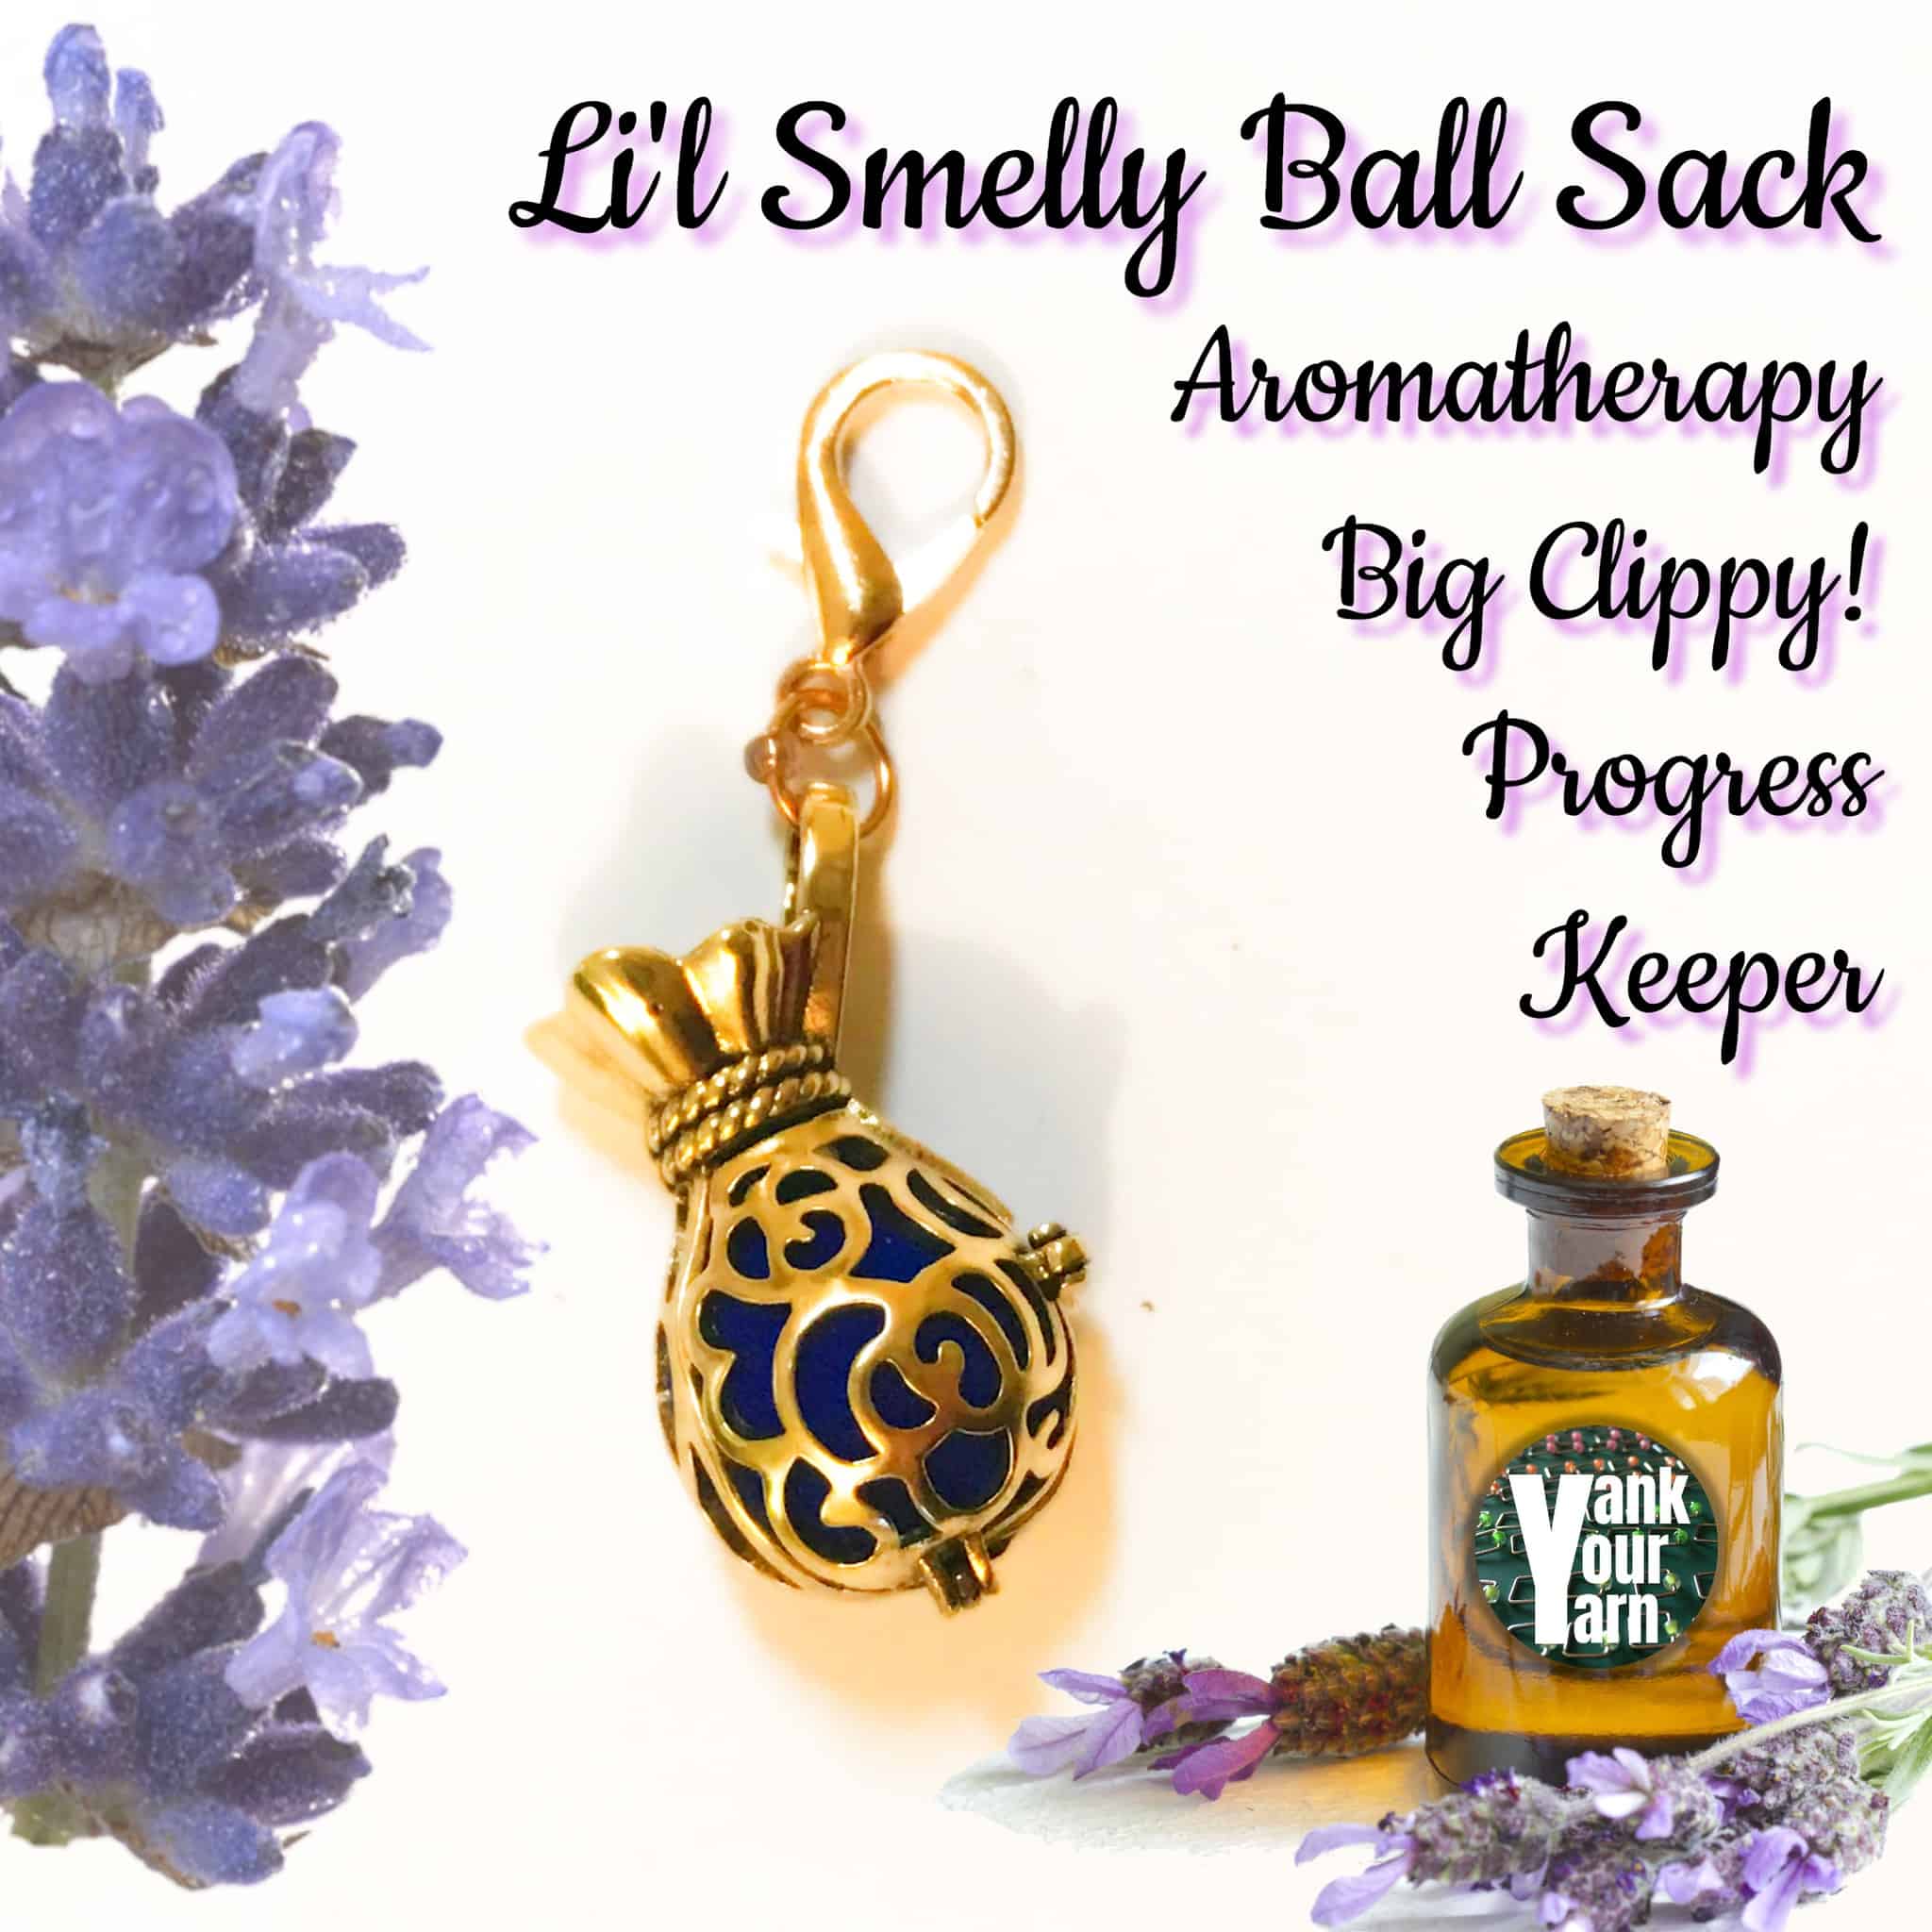 A large progress keeper-style stitch marker, on an oversized golden bronze lobster clasp with a filigree bronze essential oil pendant. The text Li'l Smelly Ball Sack - Aromatherapy Big Clippy! Progress Keeper.